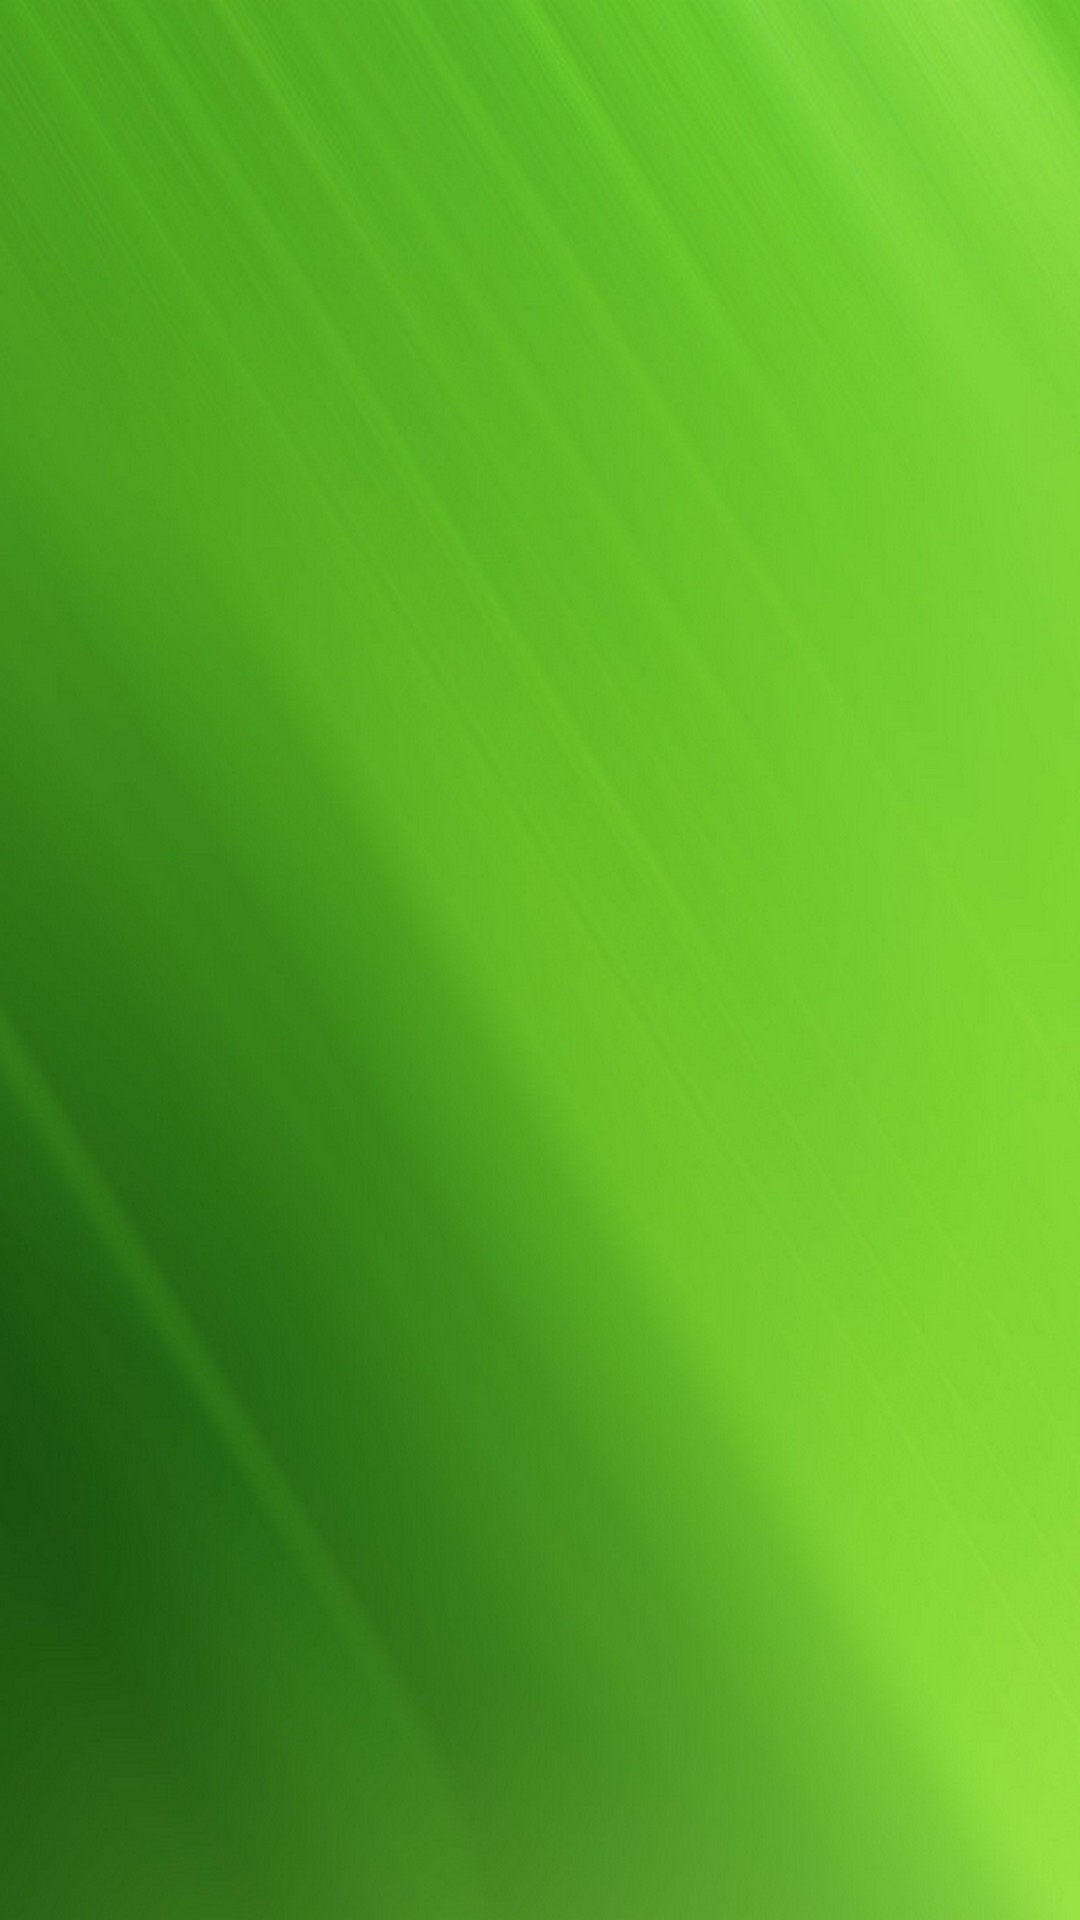 Green Wallpaper For iPhone with resolution 1080X1920 pixel. You can make this wallpaper for your iPhone 5, 6, 7, 8, X backgrounds, Mobile Screensaver, or iPad Lock Screen